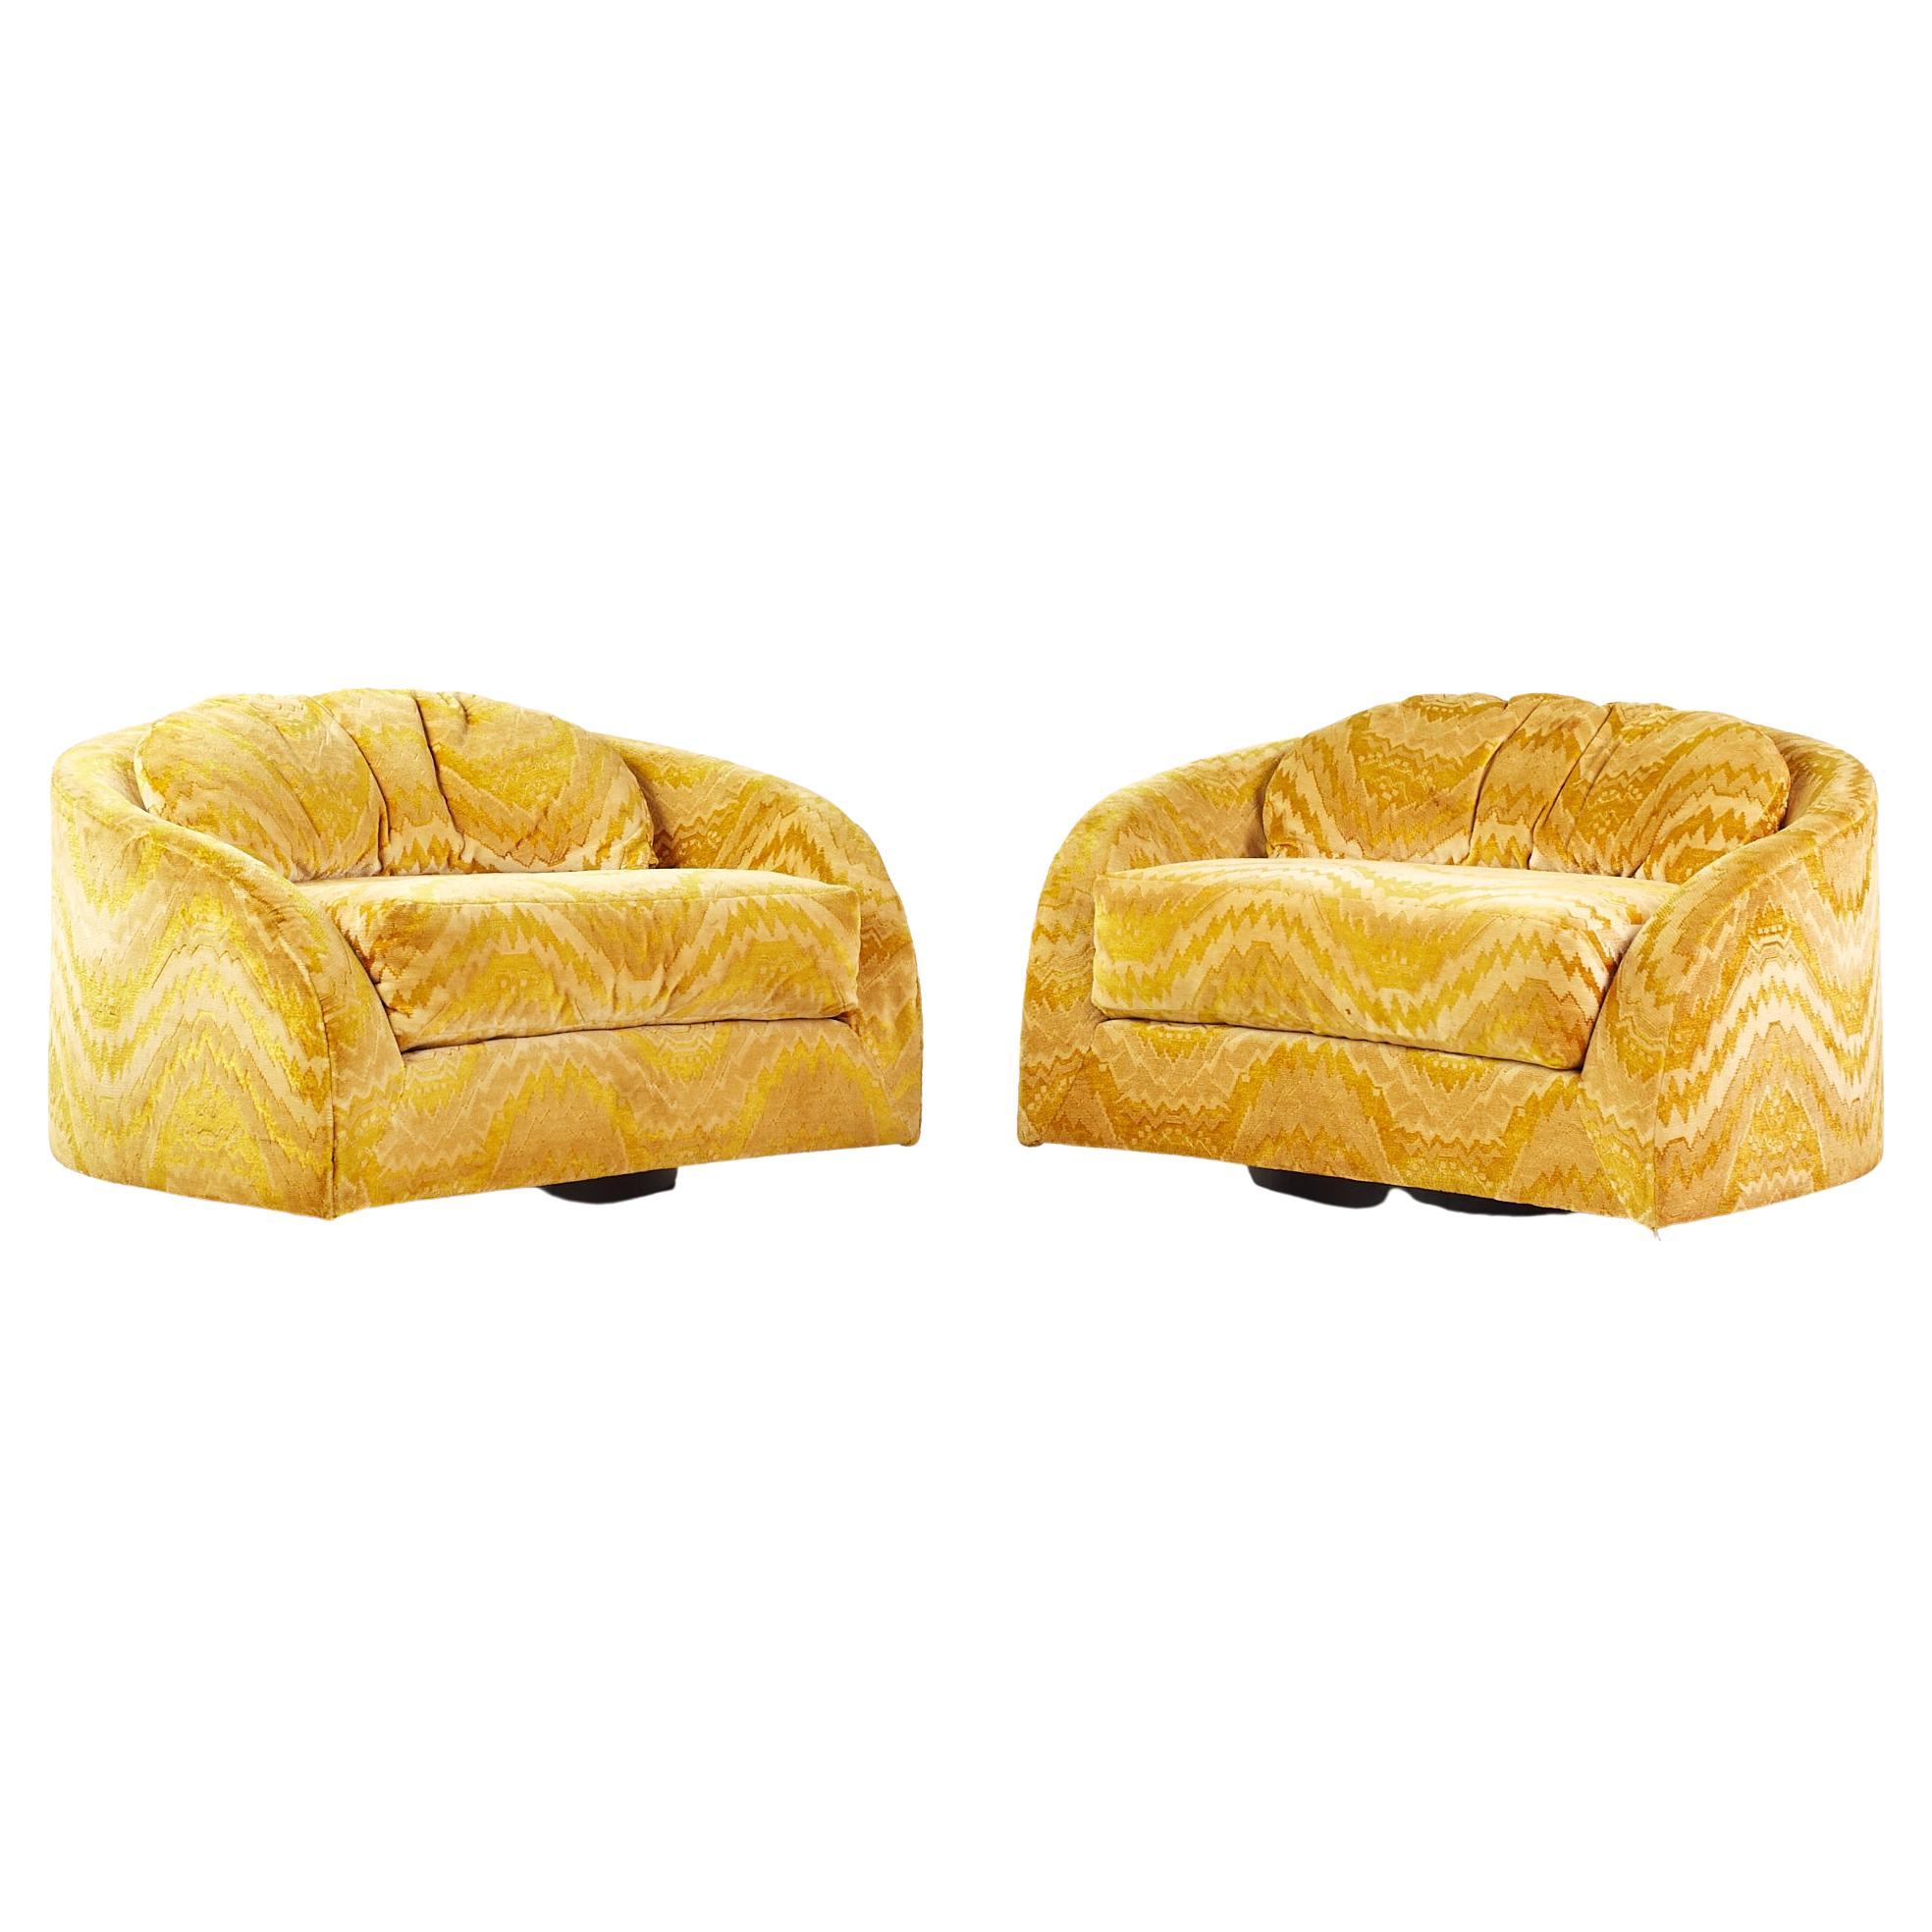 Adrian Pearsall for Craft Associates Mid Century Swivel Lounge Chairs, Pair